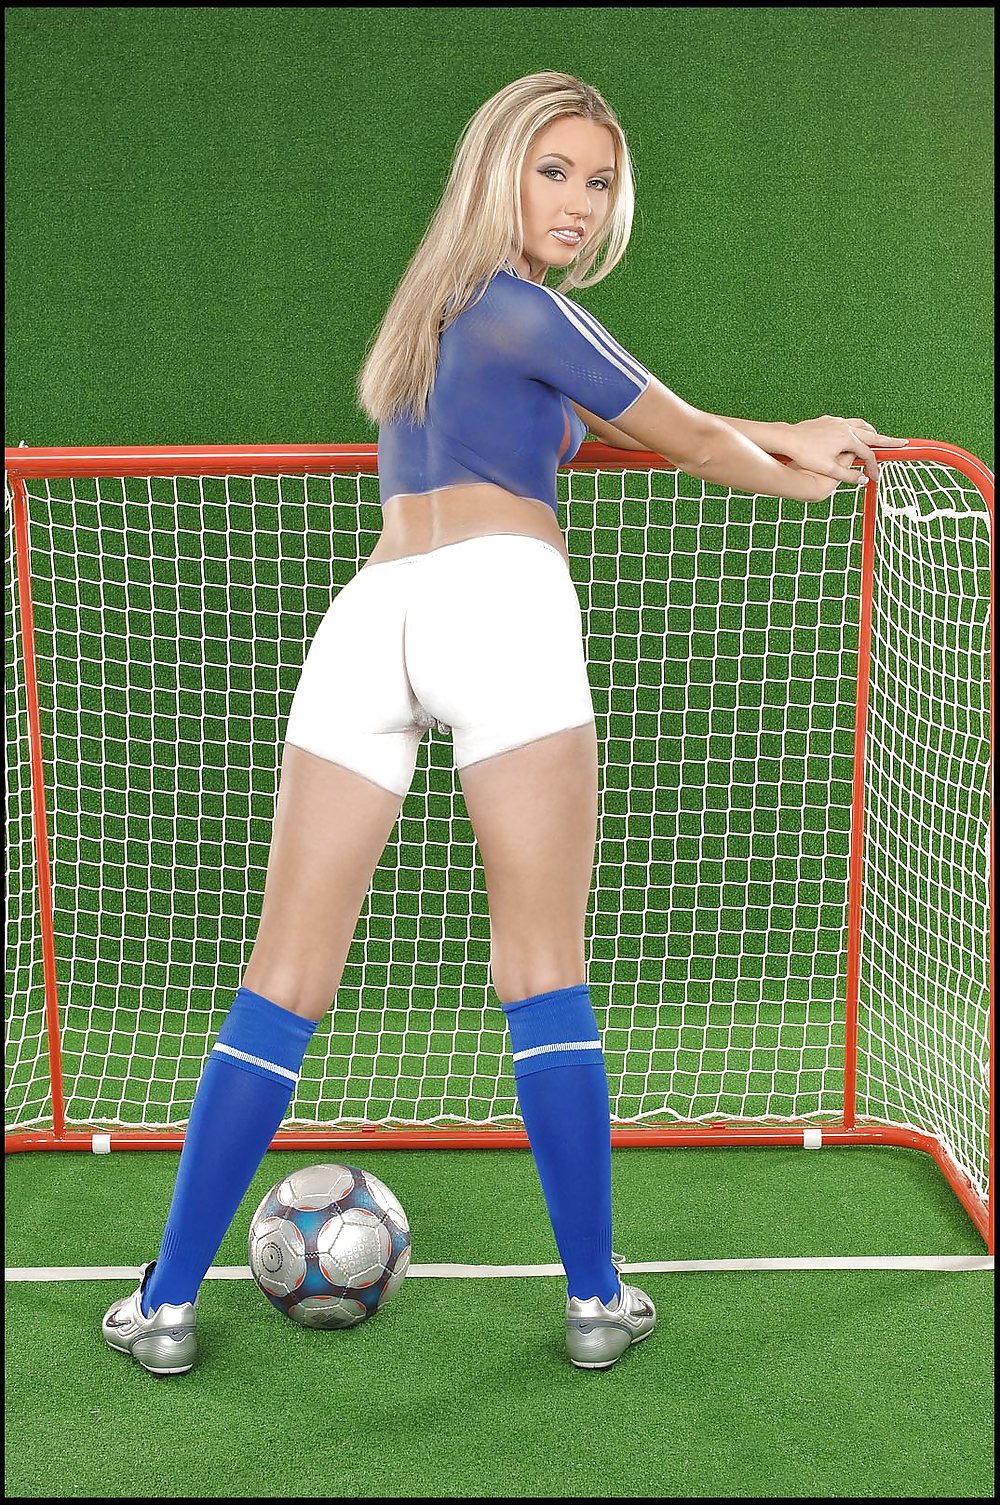 Women of World Cup Soccer-France #107299